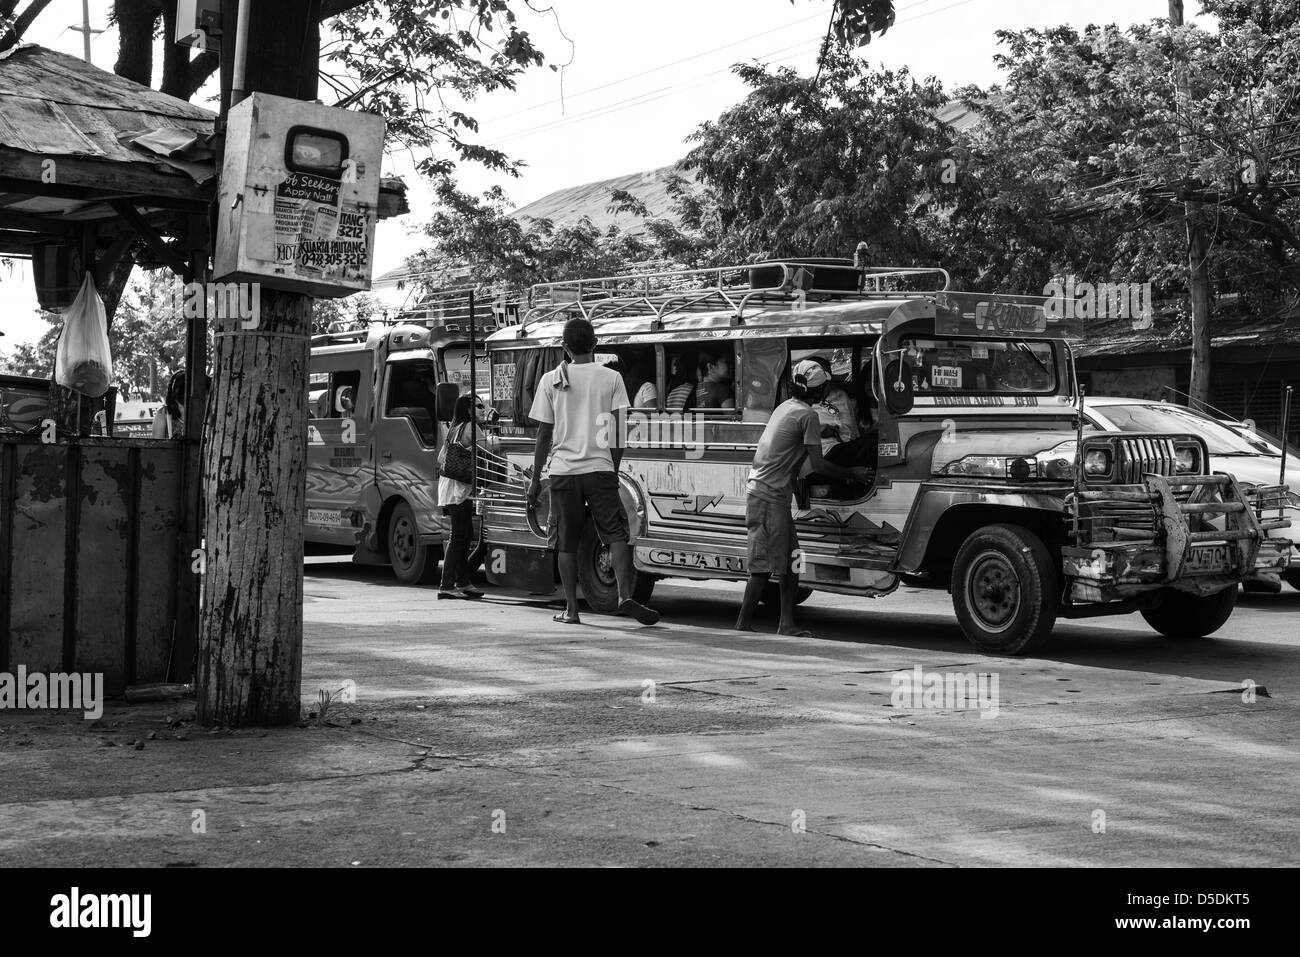 Jeepney Black and White Stock Photos & Images - Alamy